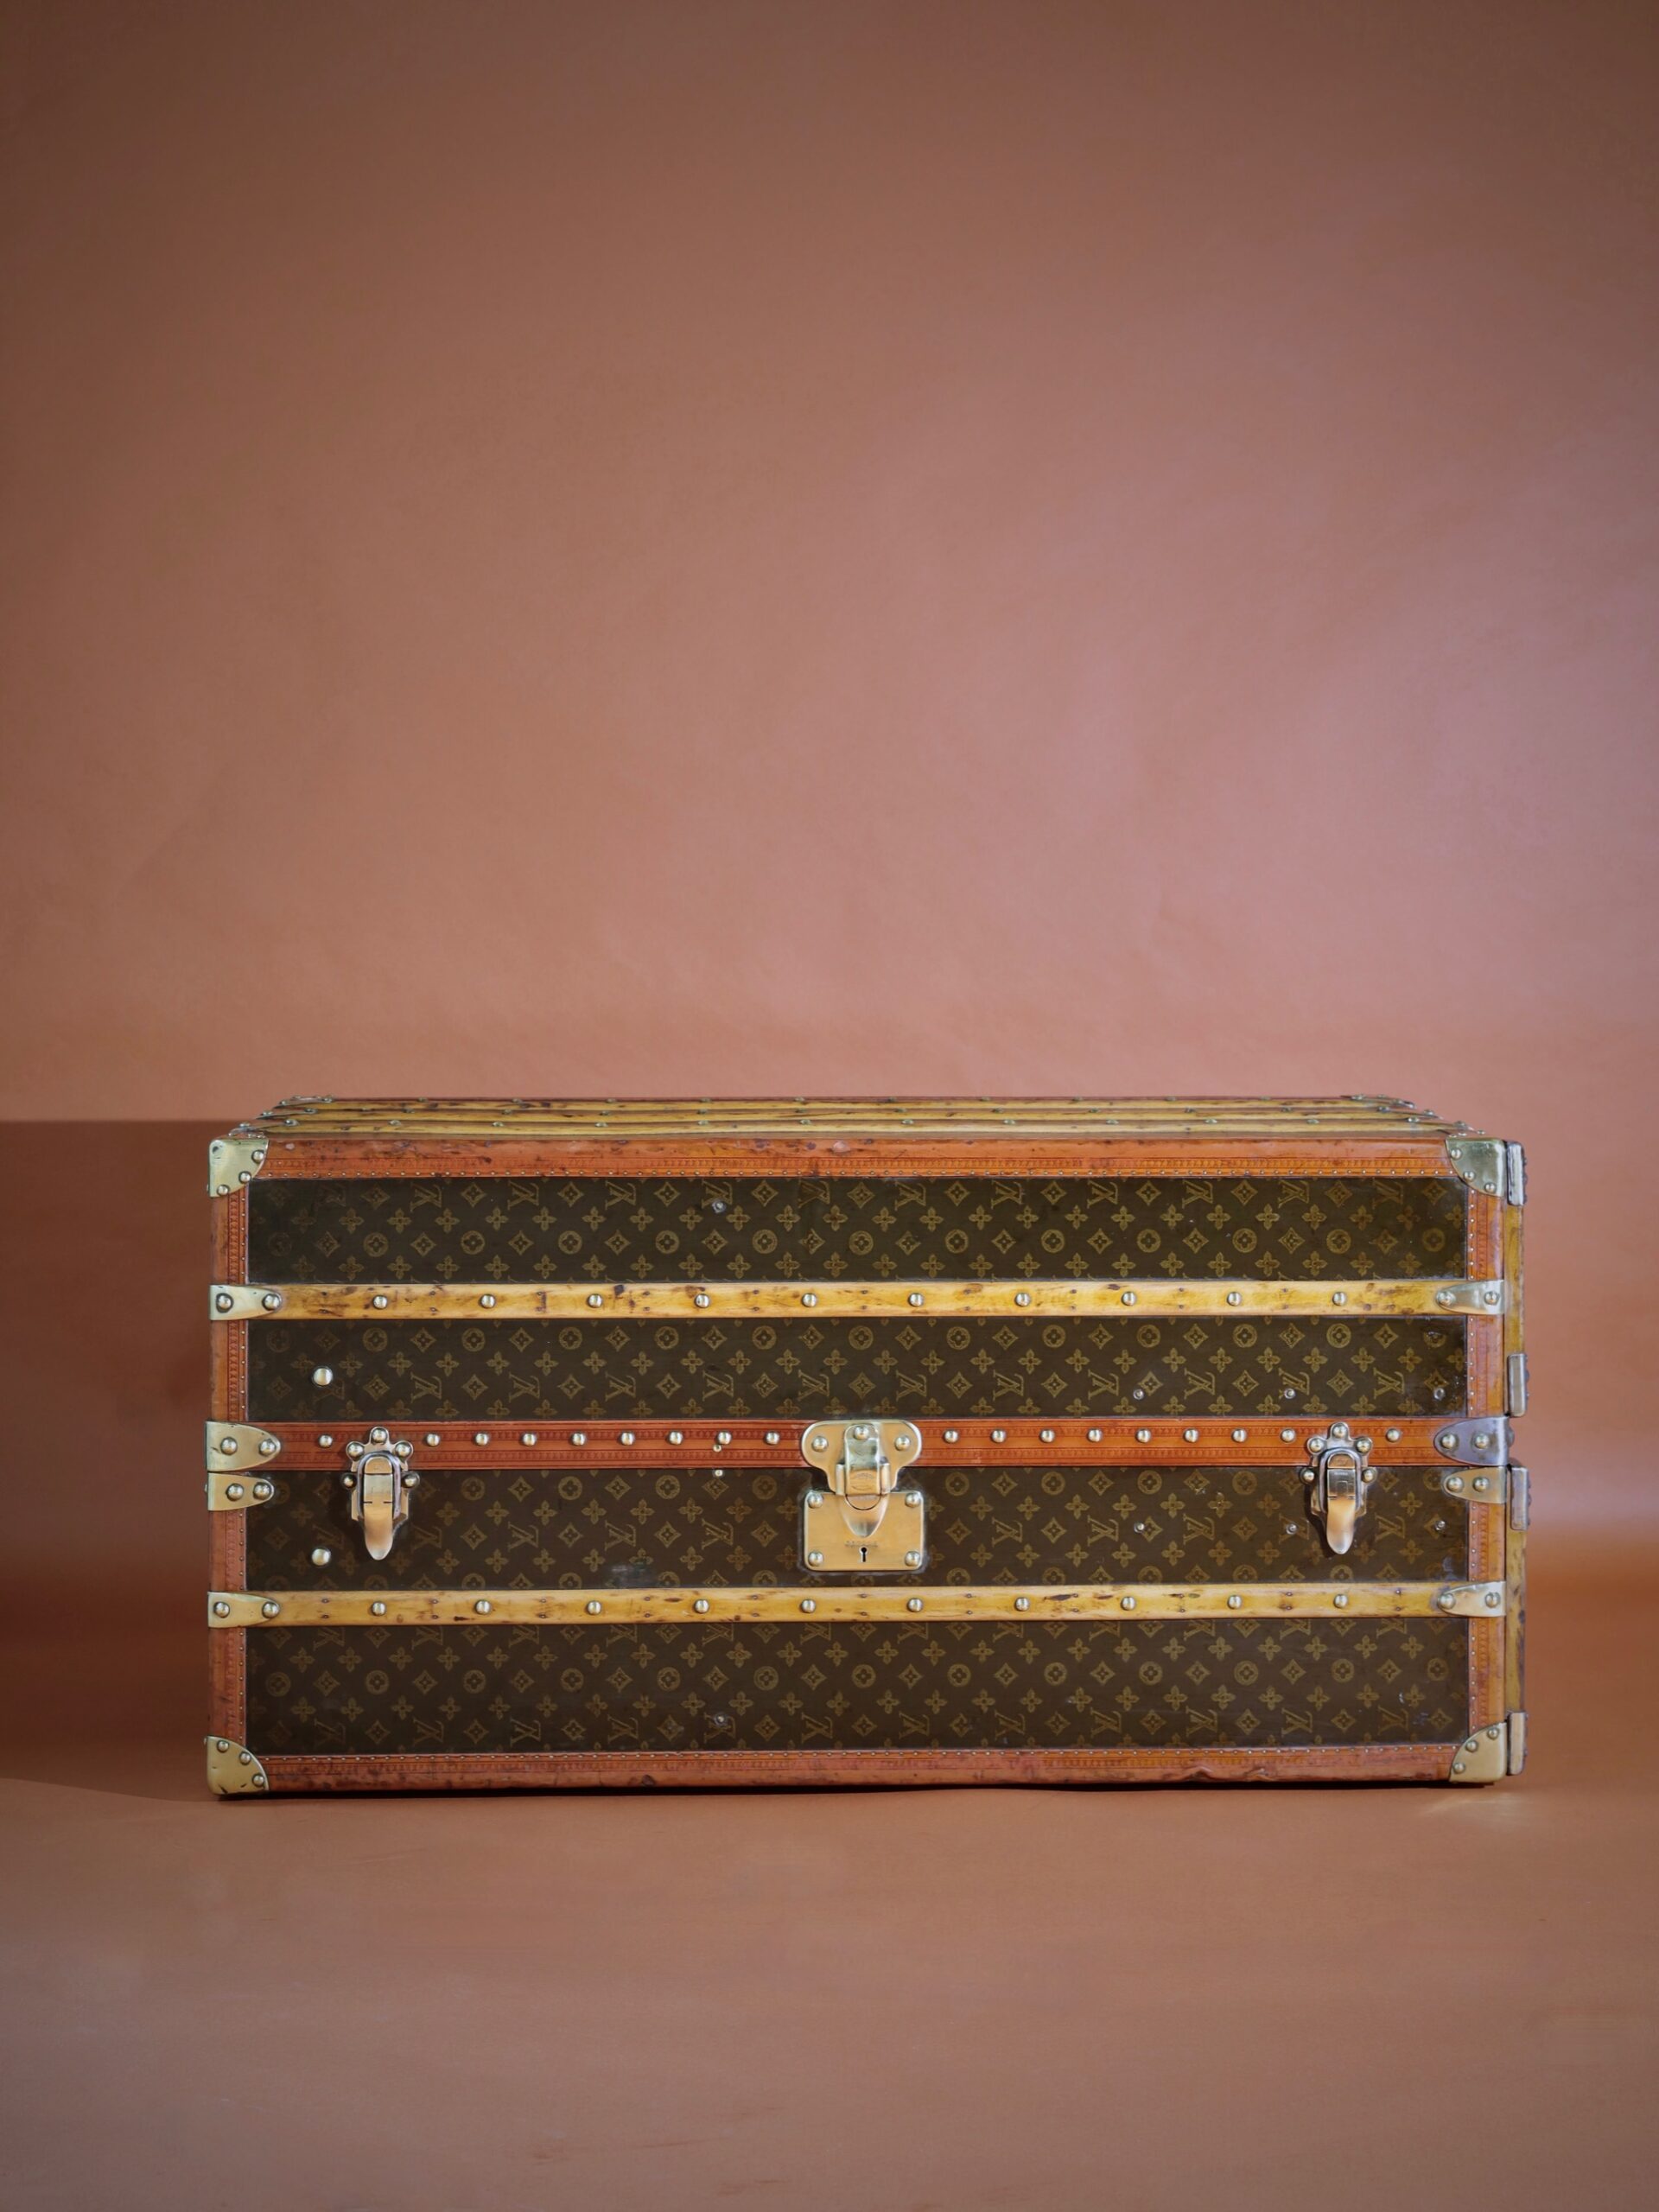 the-well-traveled-trunk-louis-vuitton-thumbnail-product-5755-1